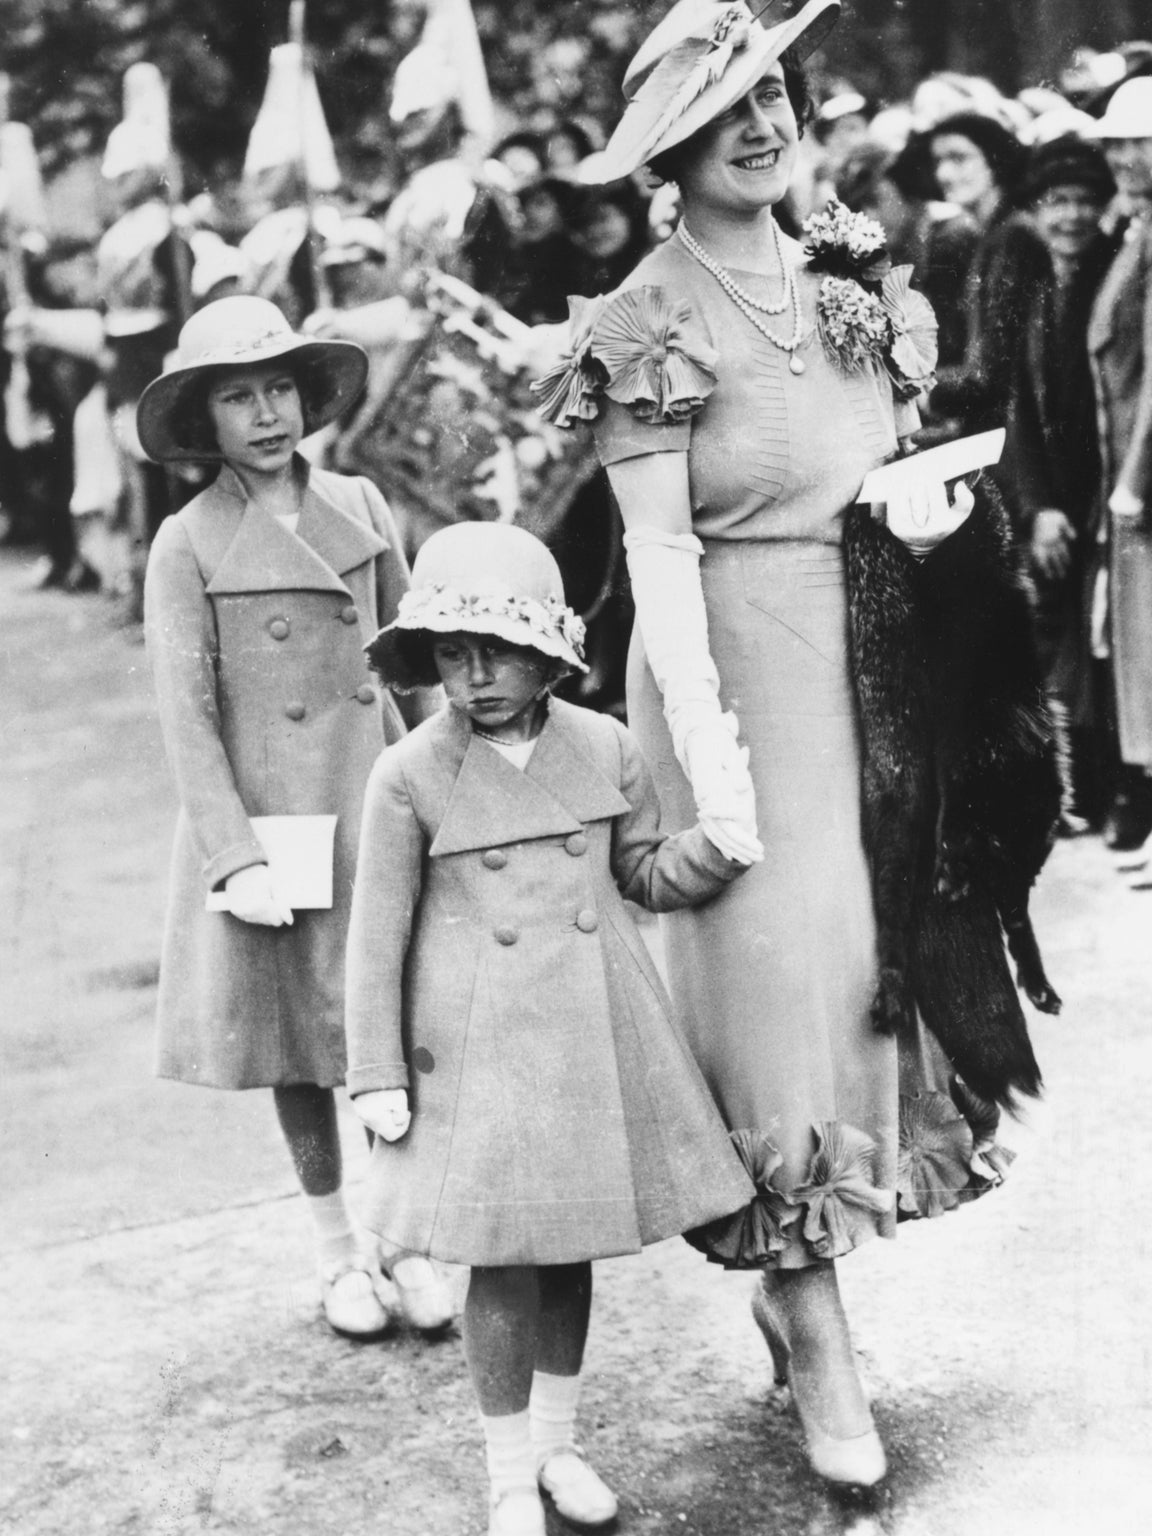 The nine-year-old Elizabeth attends an aristocratic wedding in 1936 with her mother and younger sister. Later in that year, with the death of her grandfather and the abdication of her Uncle Edward VIII, she became first in line to the throne